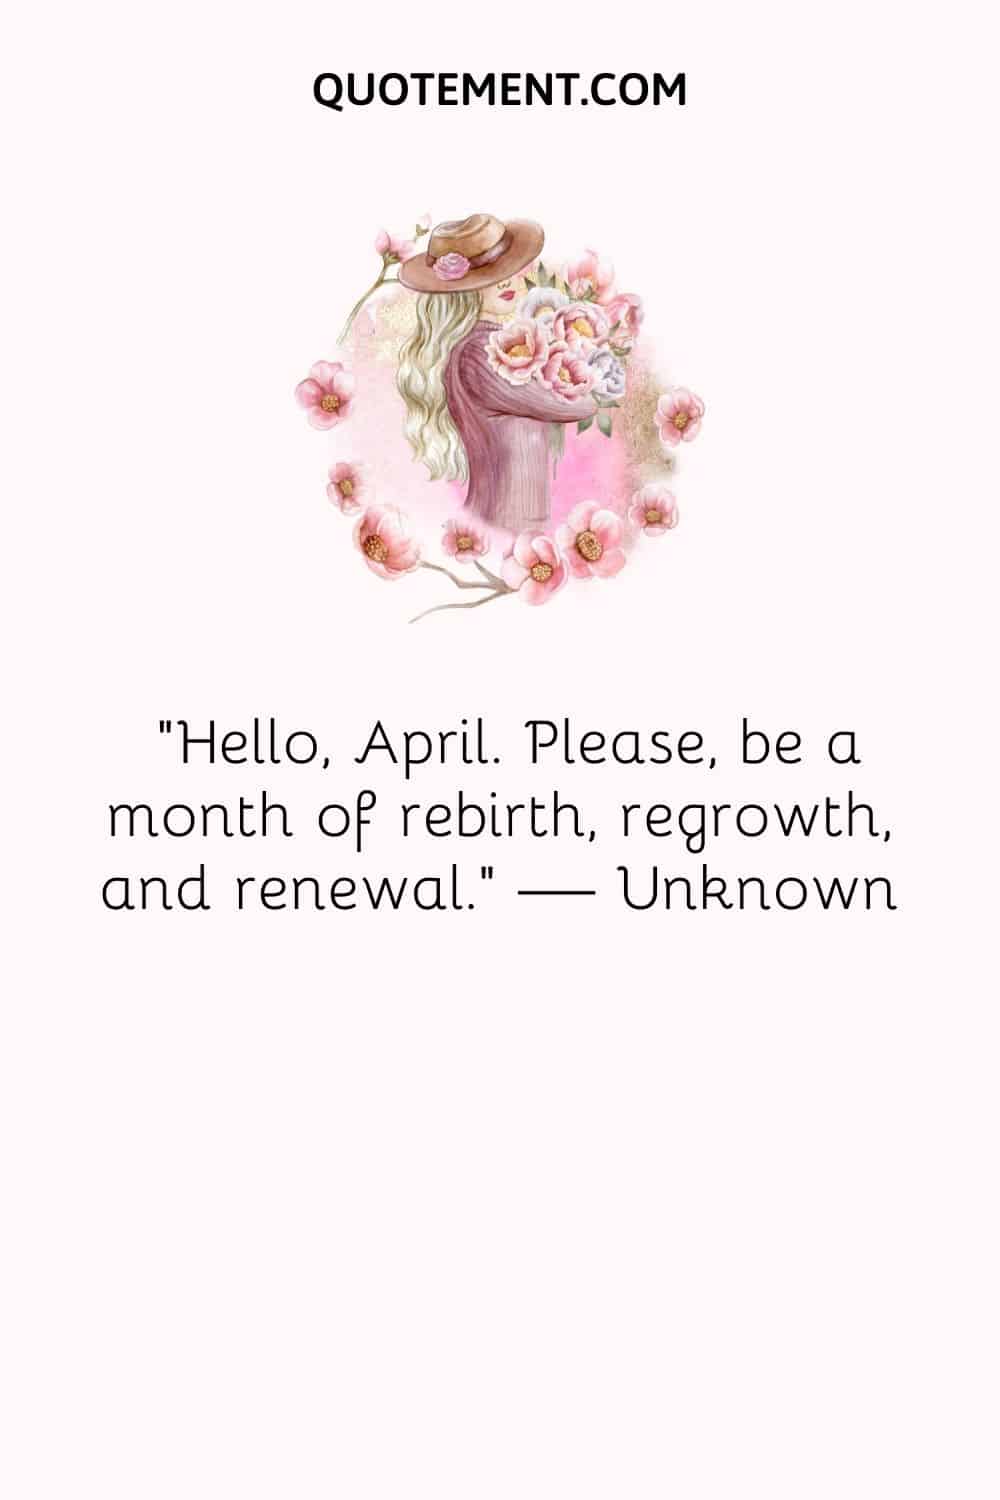 a girl carrying flowers image representing inspirational hello April quote